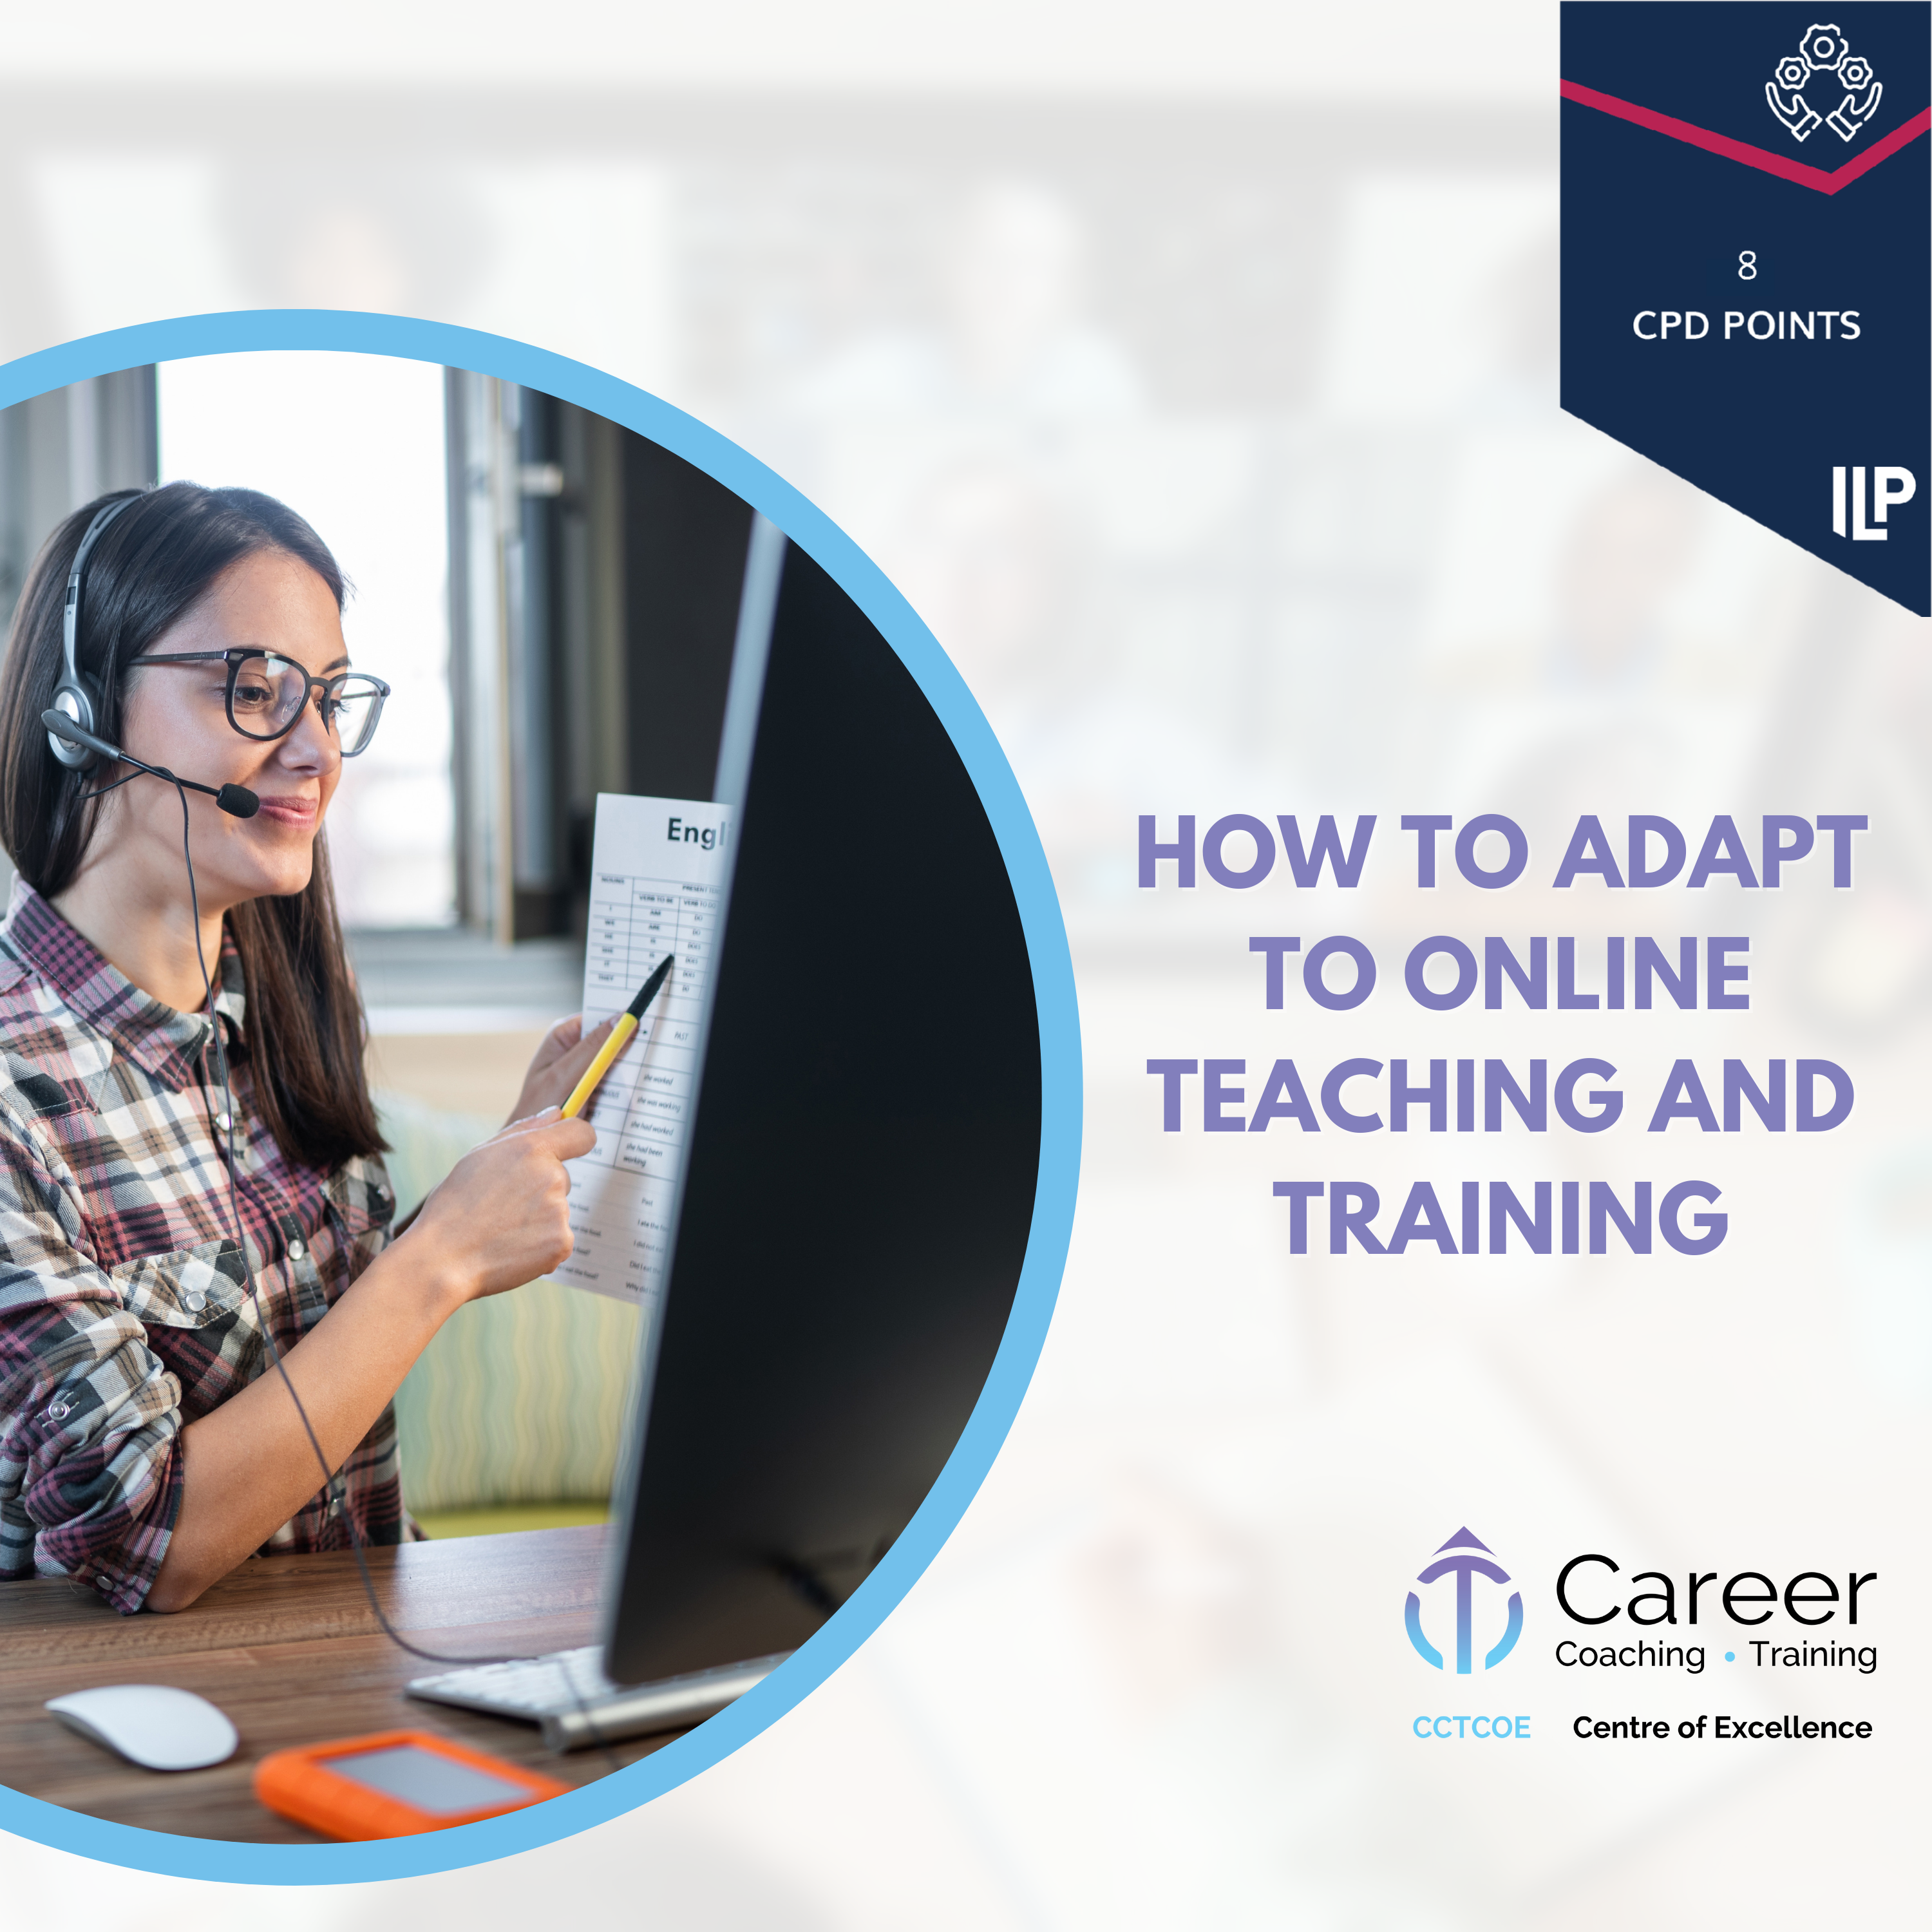 How to Adapt to Online Teaching and Training